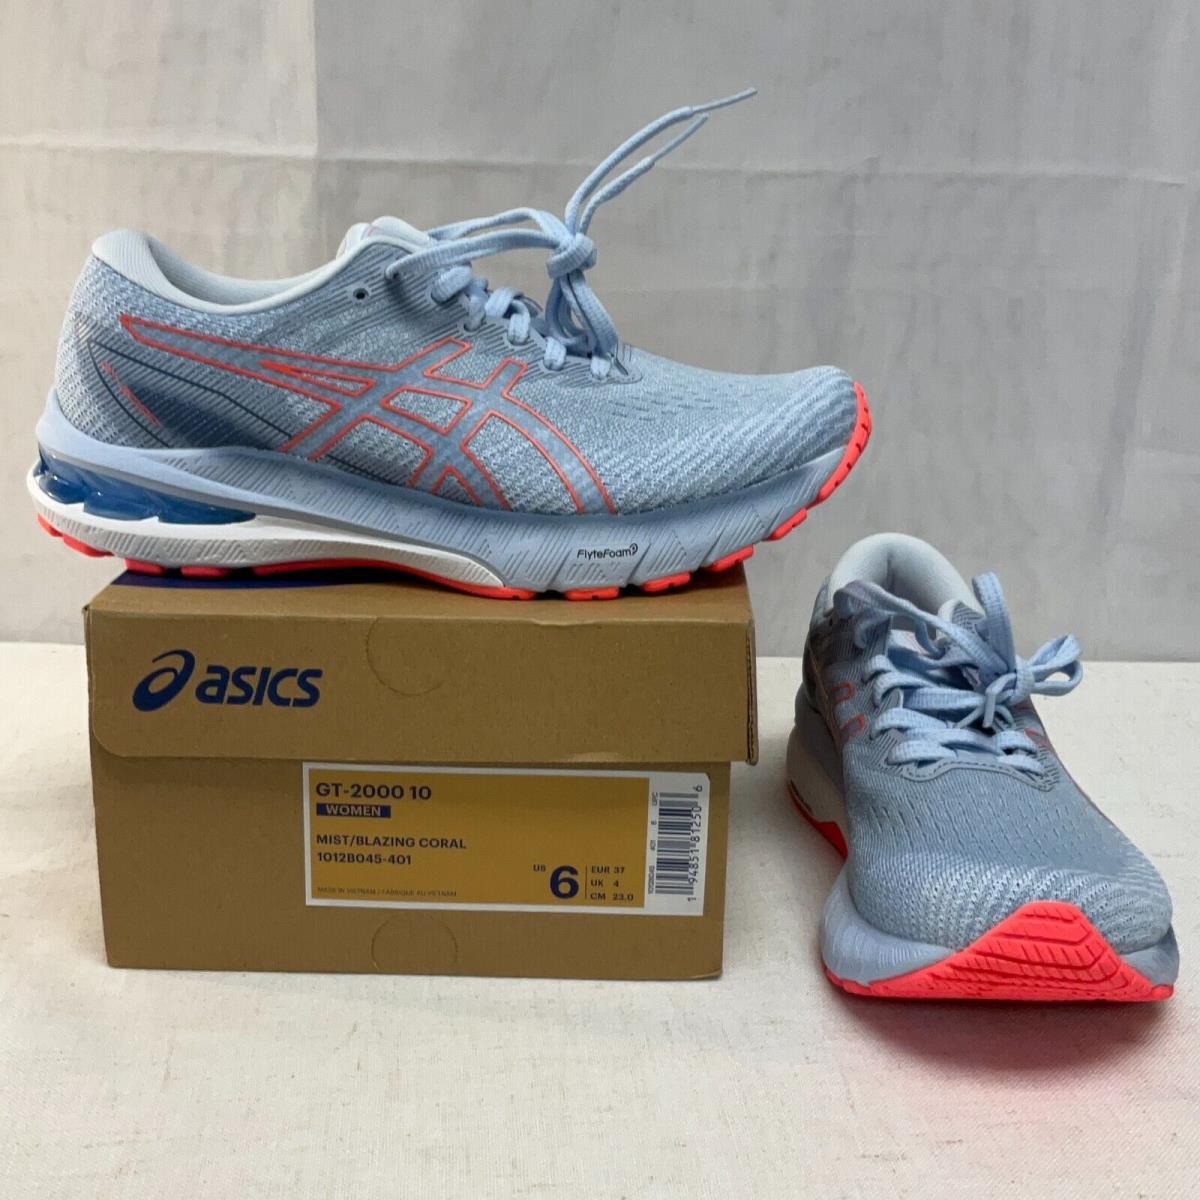 Asics GT-2000 10 Womens Mist Coral Lace Up Running Shoes Size US 6 1012B045-401